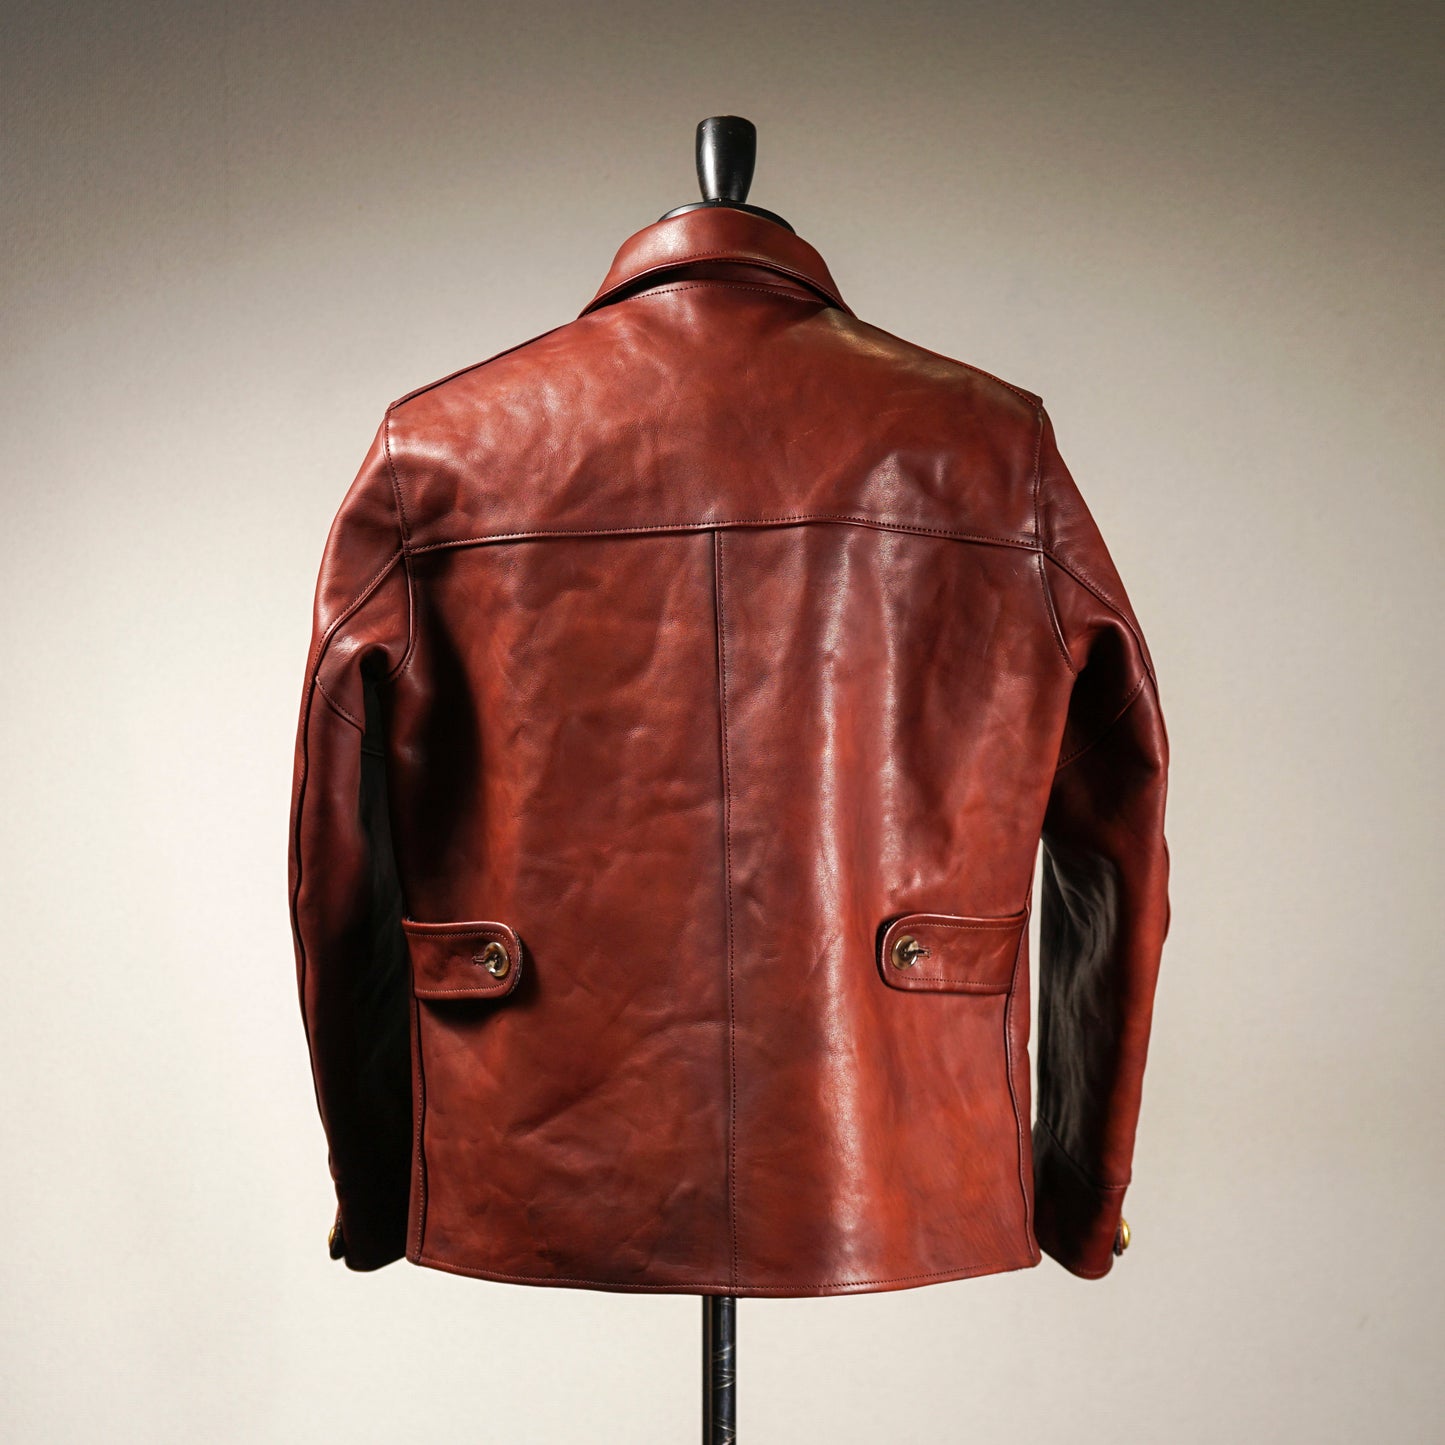 GOODFIELD "OLD OIL LEATHER" / BYGH-22-AW-01